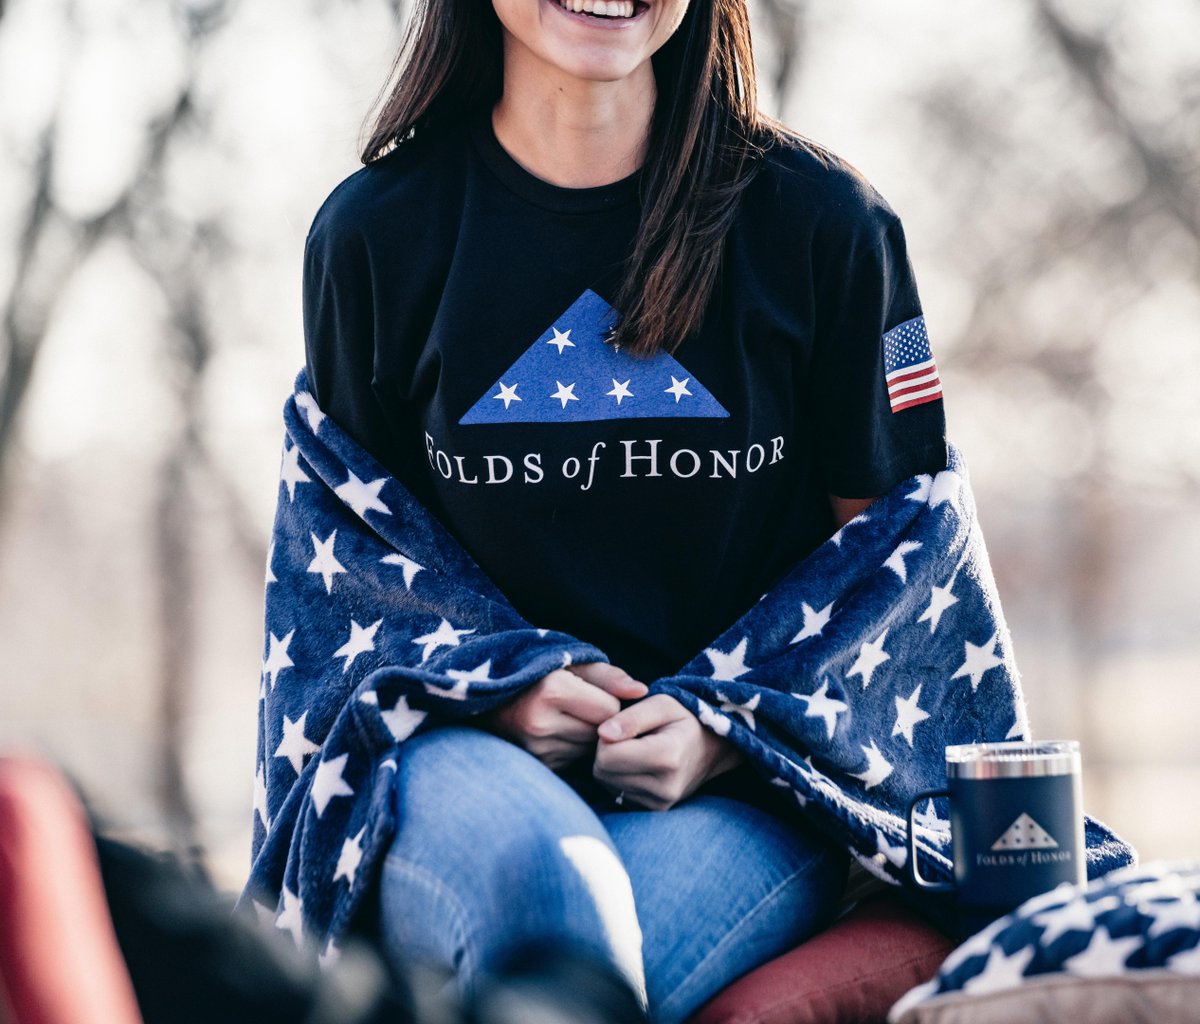 Shop our Folds of Honor Logo T-Shirts and wear your support on your sleeve! Each purchase you make from our store makes a difference in the lives of military and first responder families. Get your t-shirt and help change lives today: store.foldsofhonor.org/collections/t-…